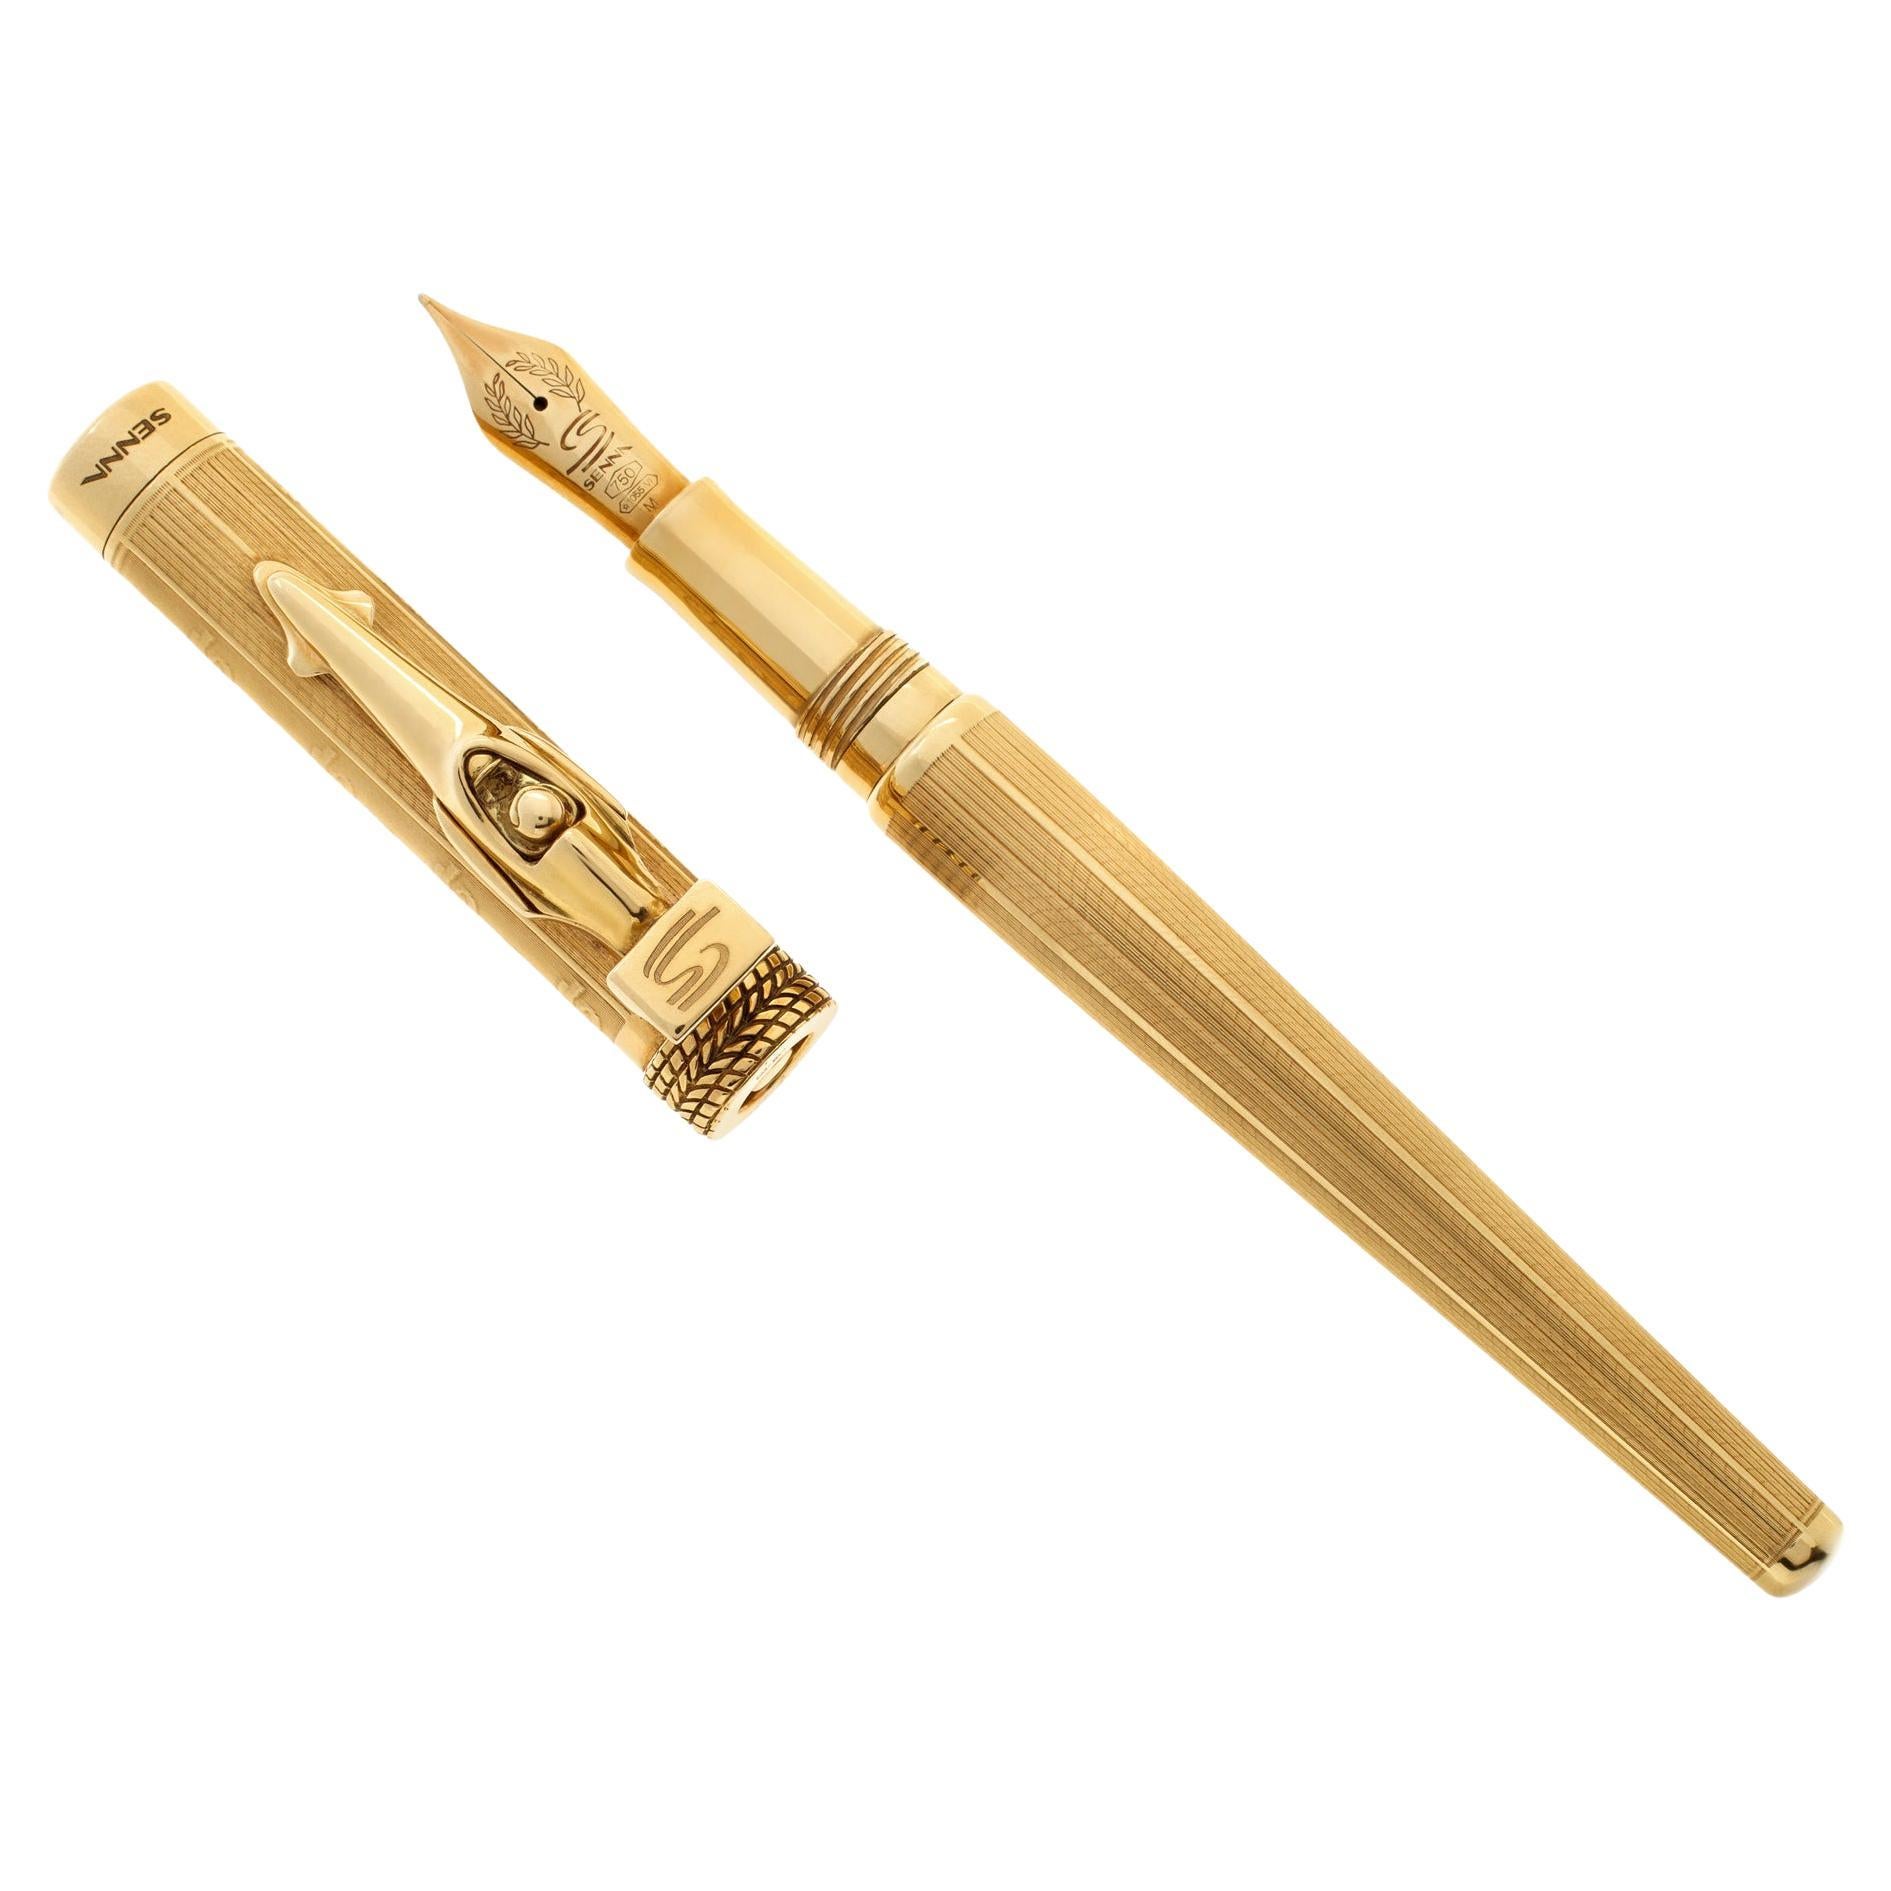 Montegrappa "Tribute to Ayrton Senna" Fountain Pen in 18k Yellow Gold Highly